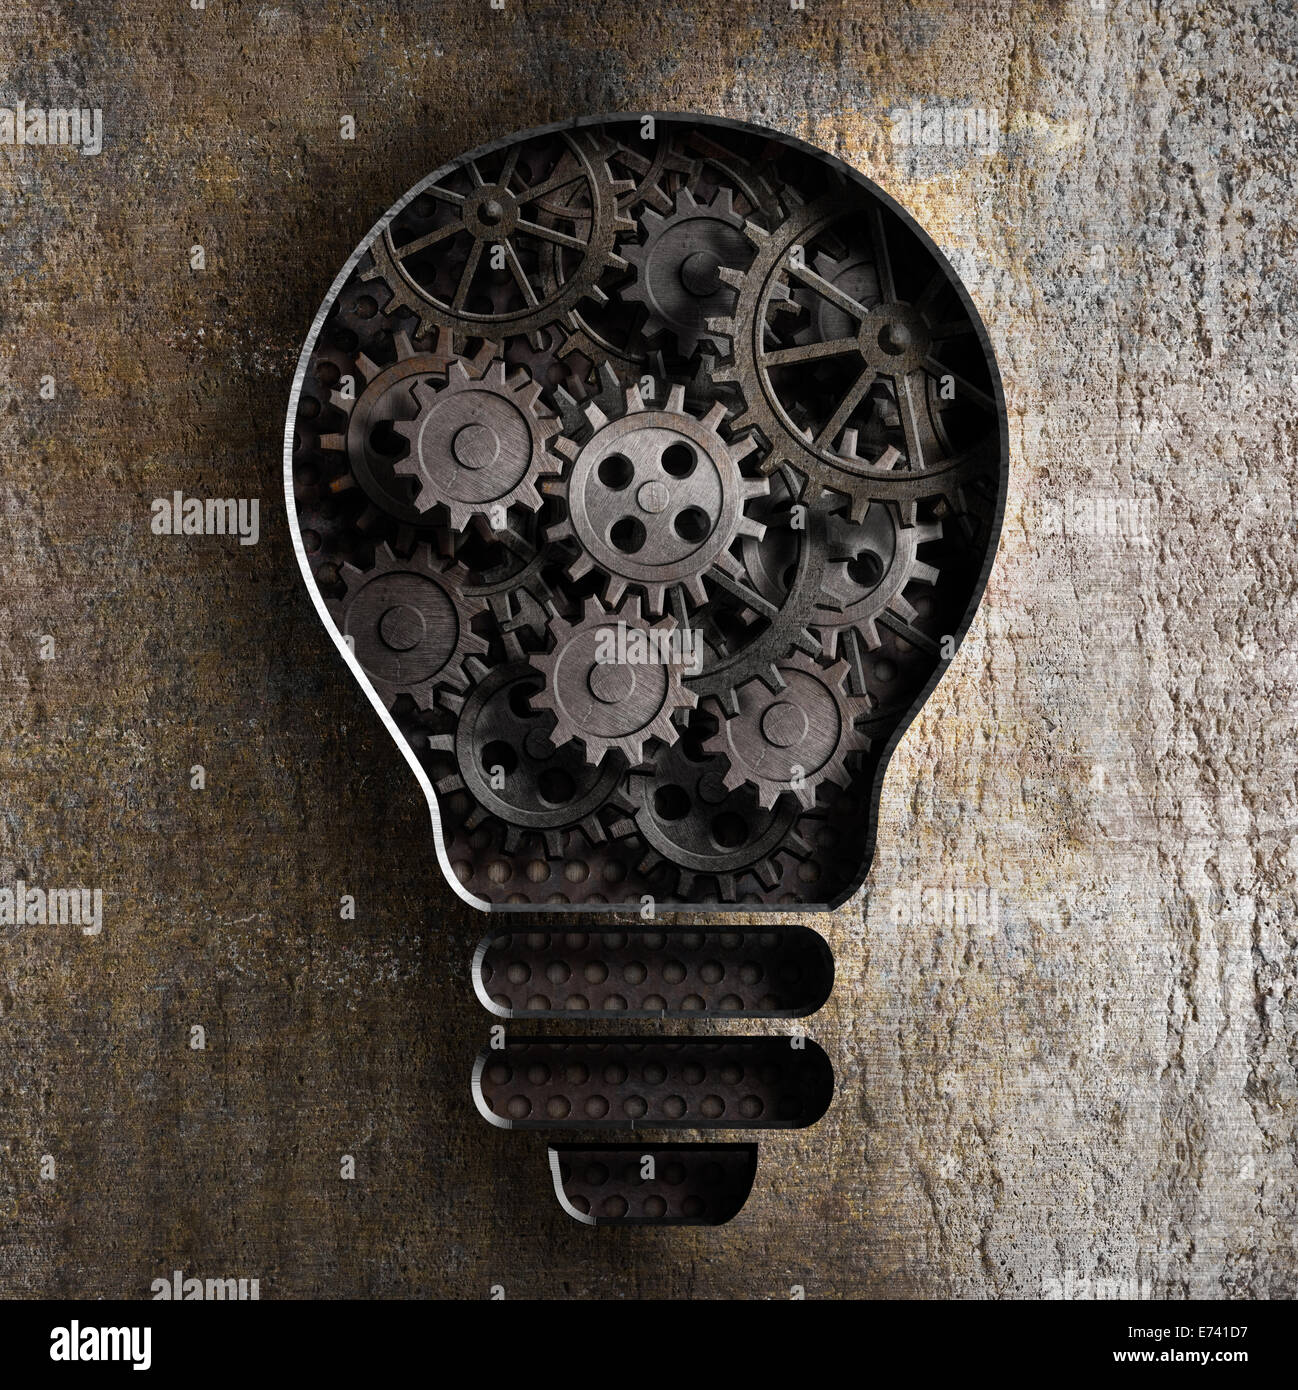 lighting bulb business concept with working gears and cogs in rusty metal background Stock Photo